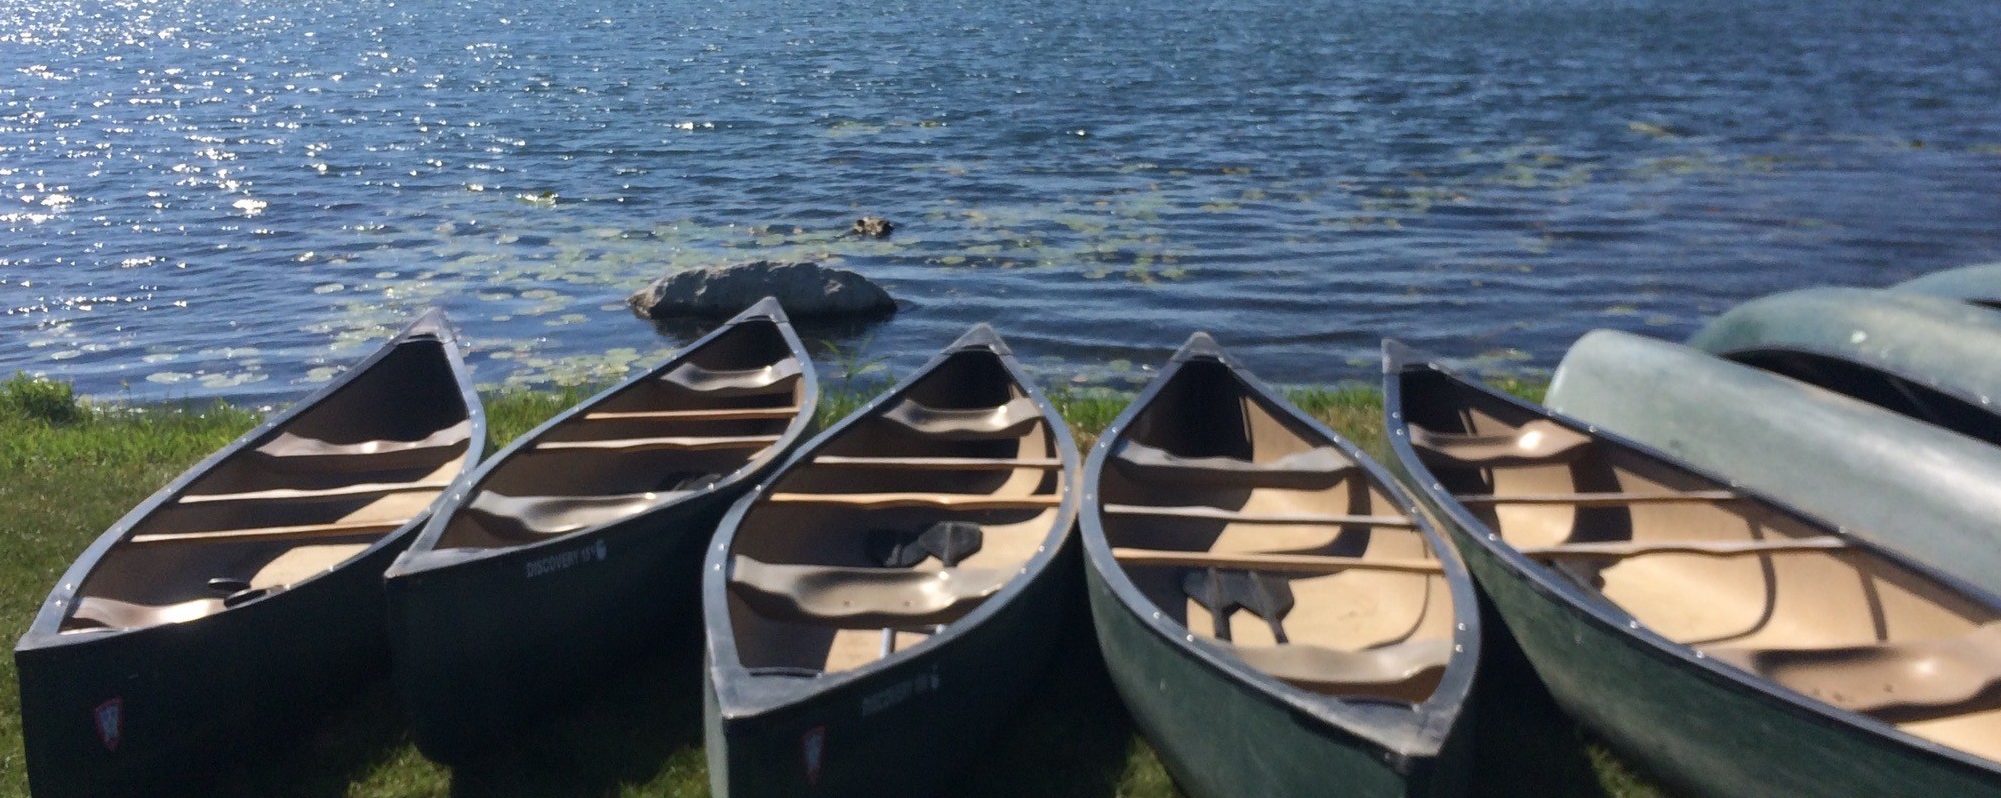 Canoes near the water